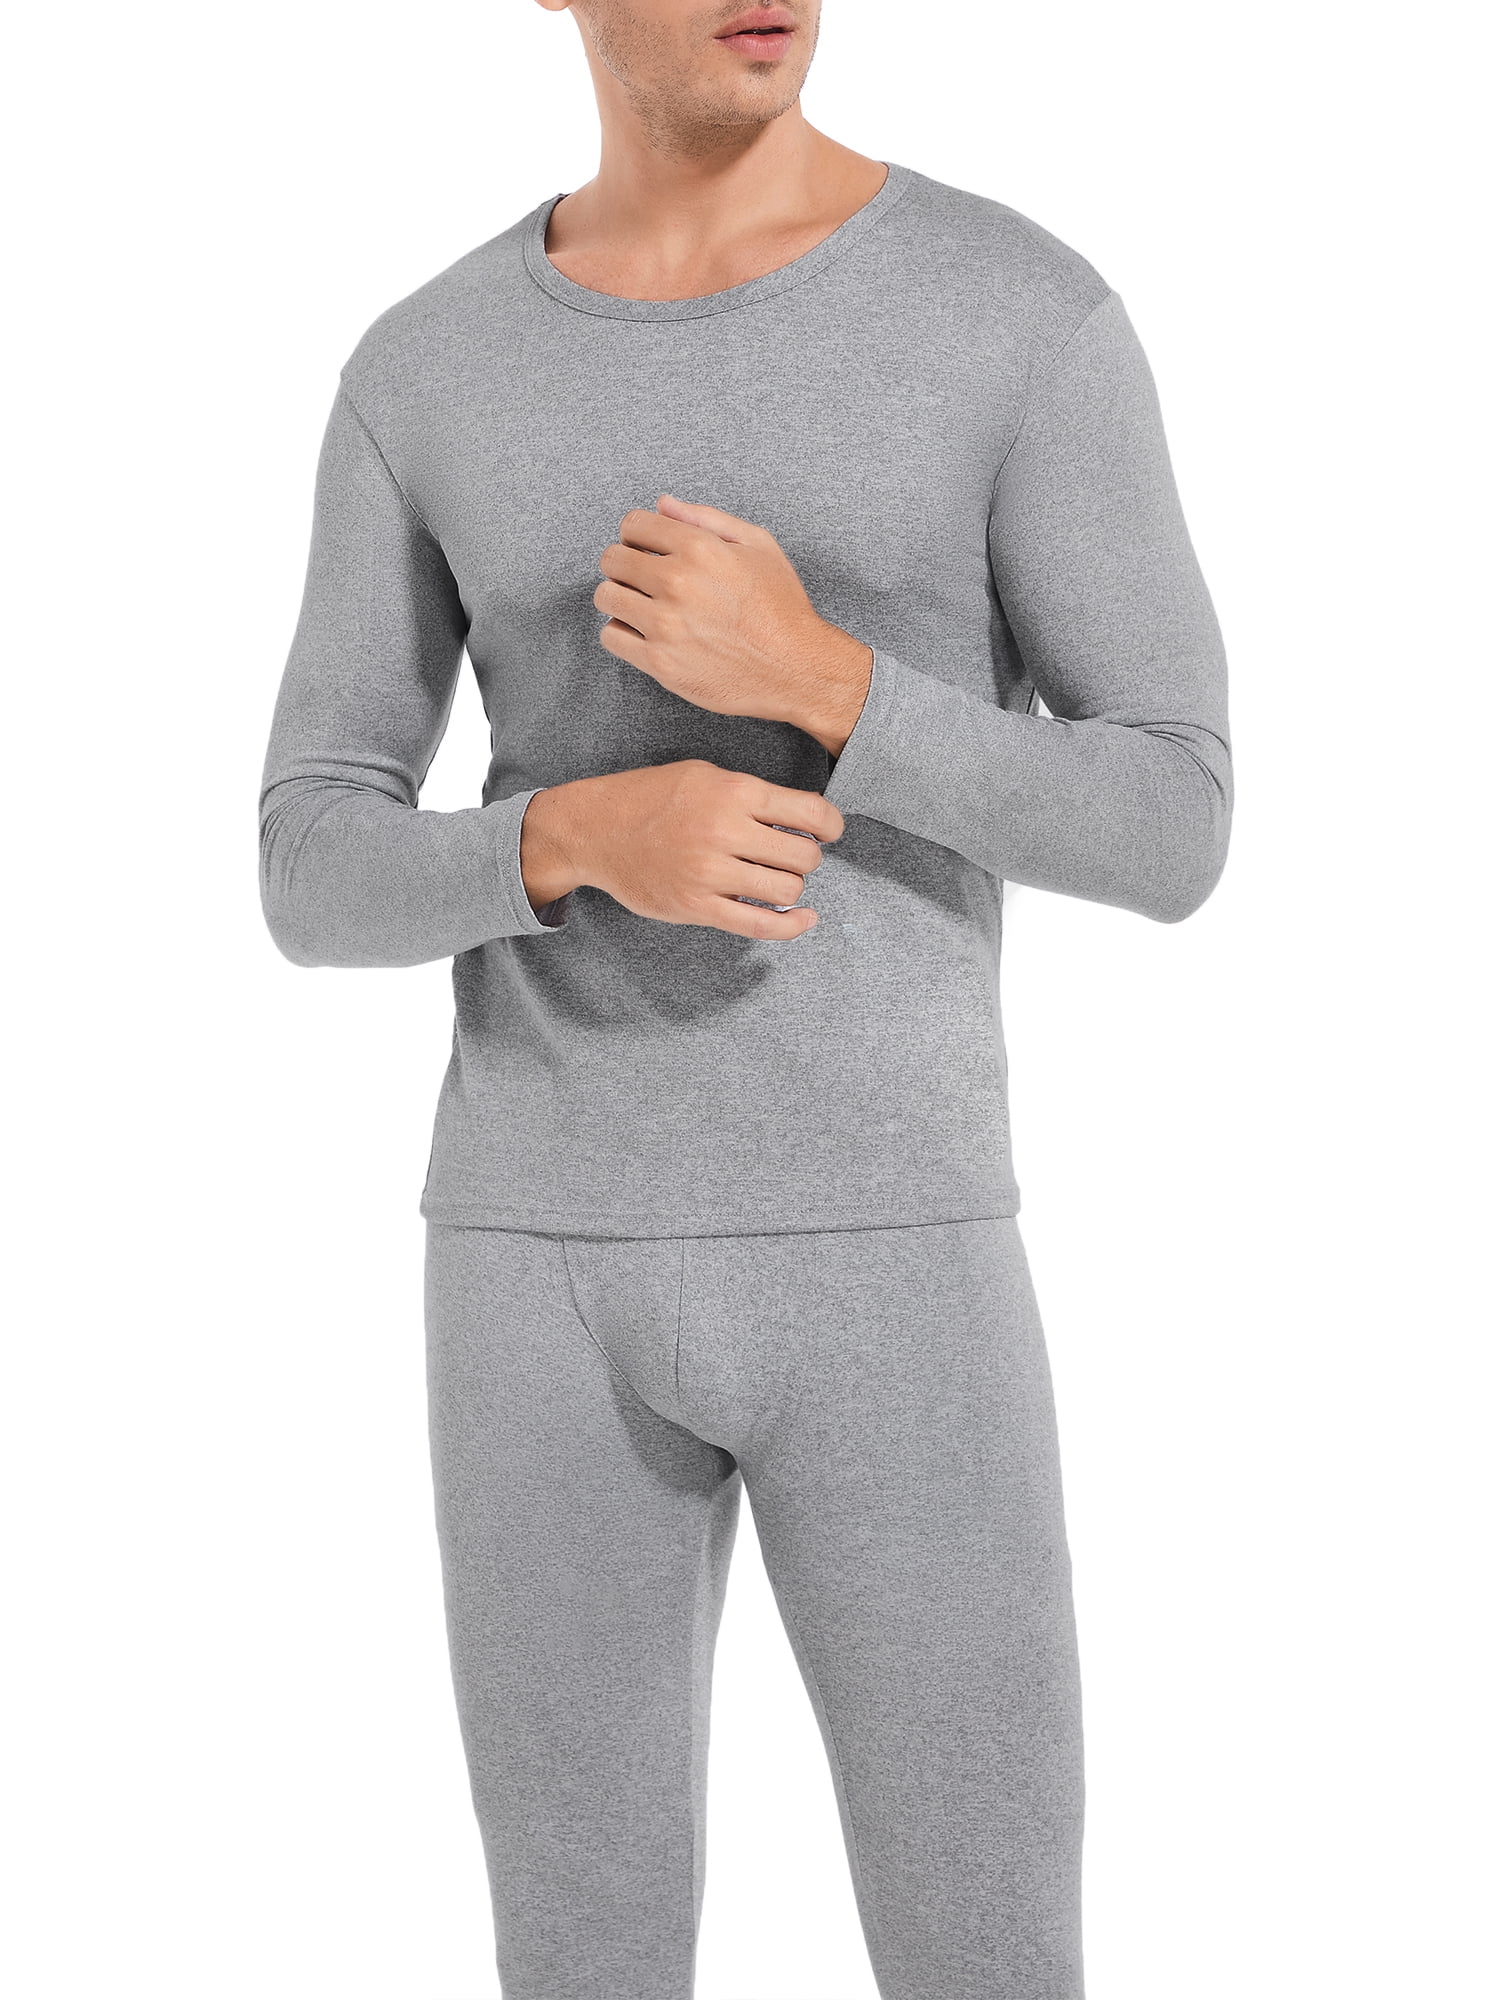 ANYFIT WEAR Men's Thermal Underwear Long Johns Set Fleece Lined Base Layer  Warm Top&Bottom for Cold Weather Gray S 